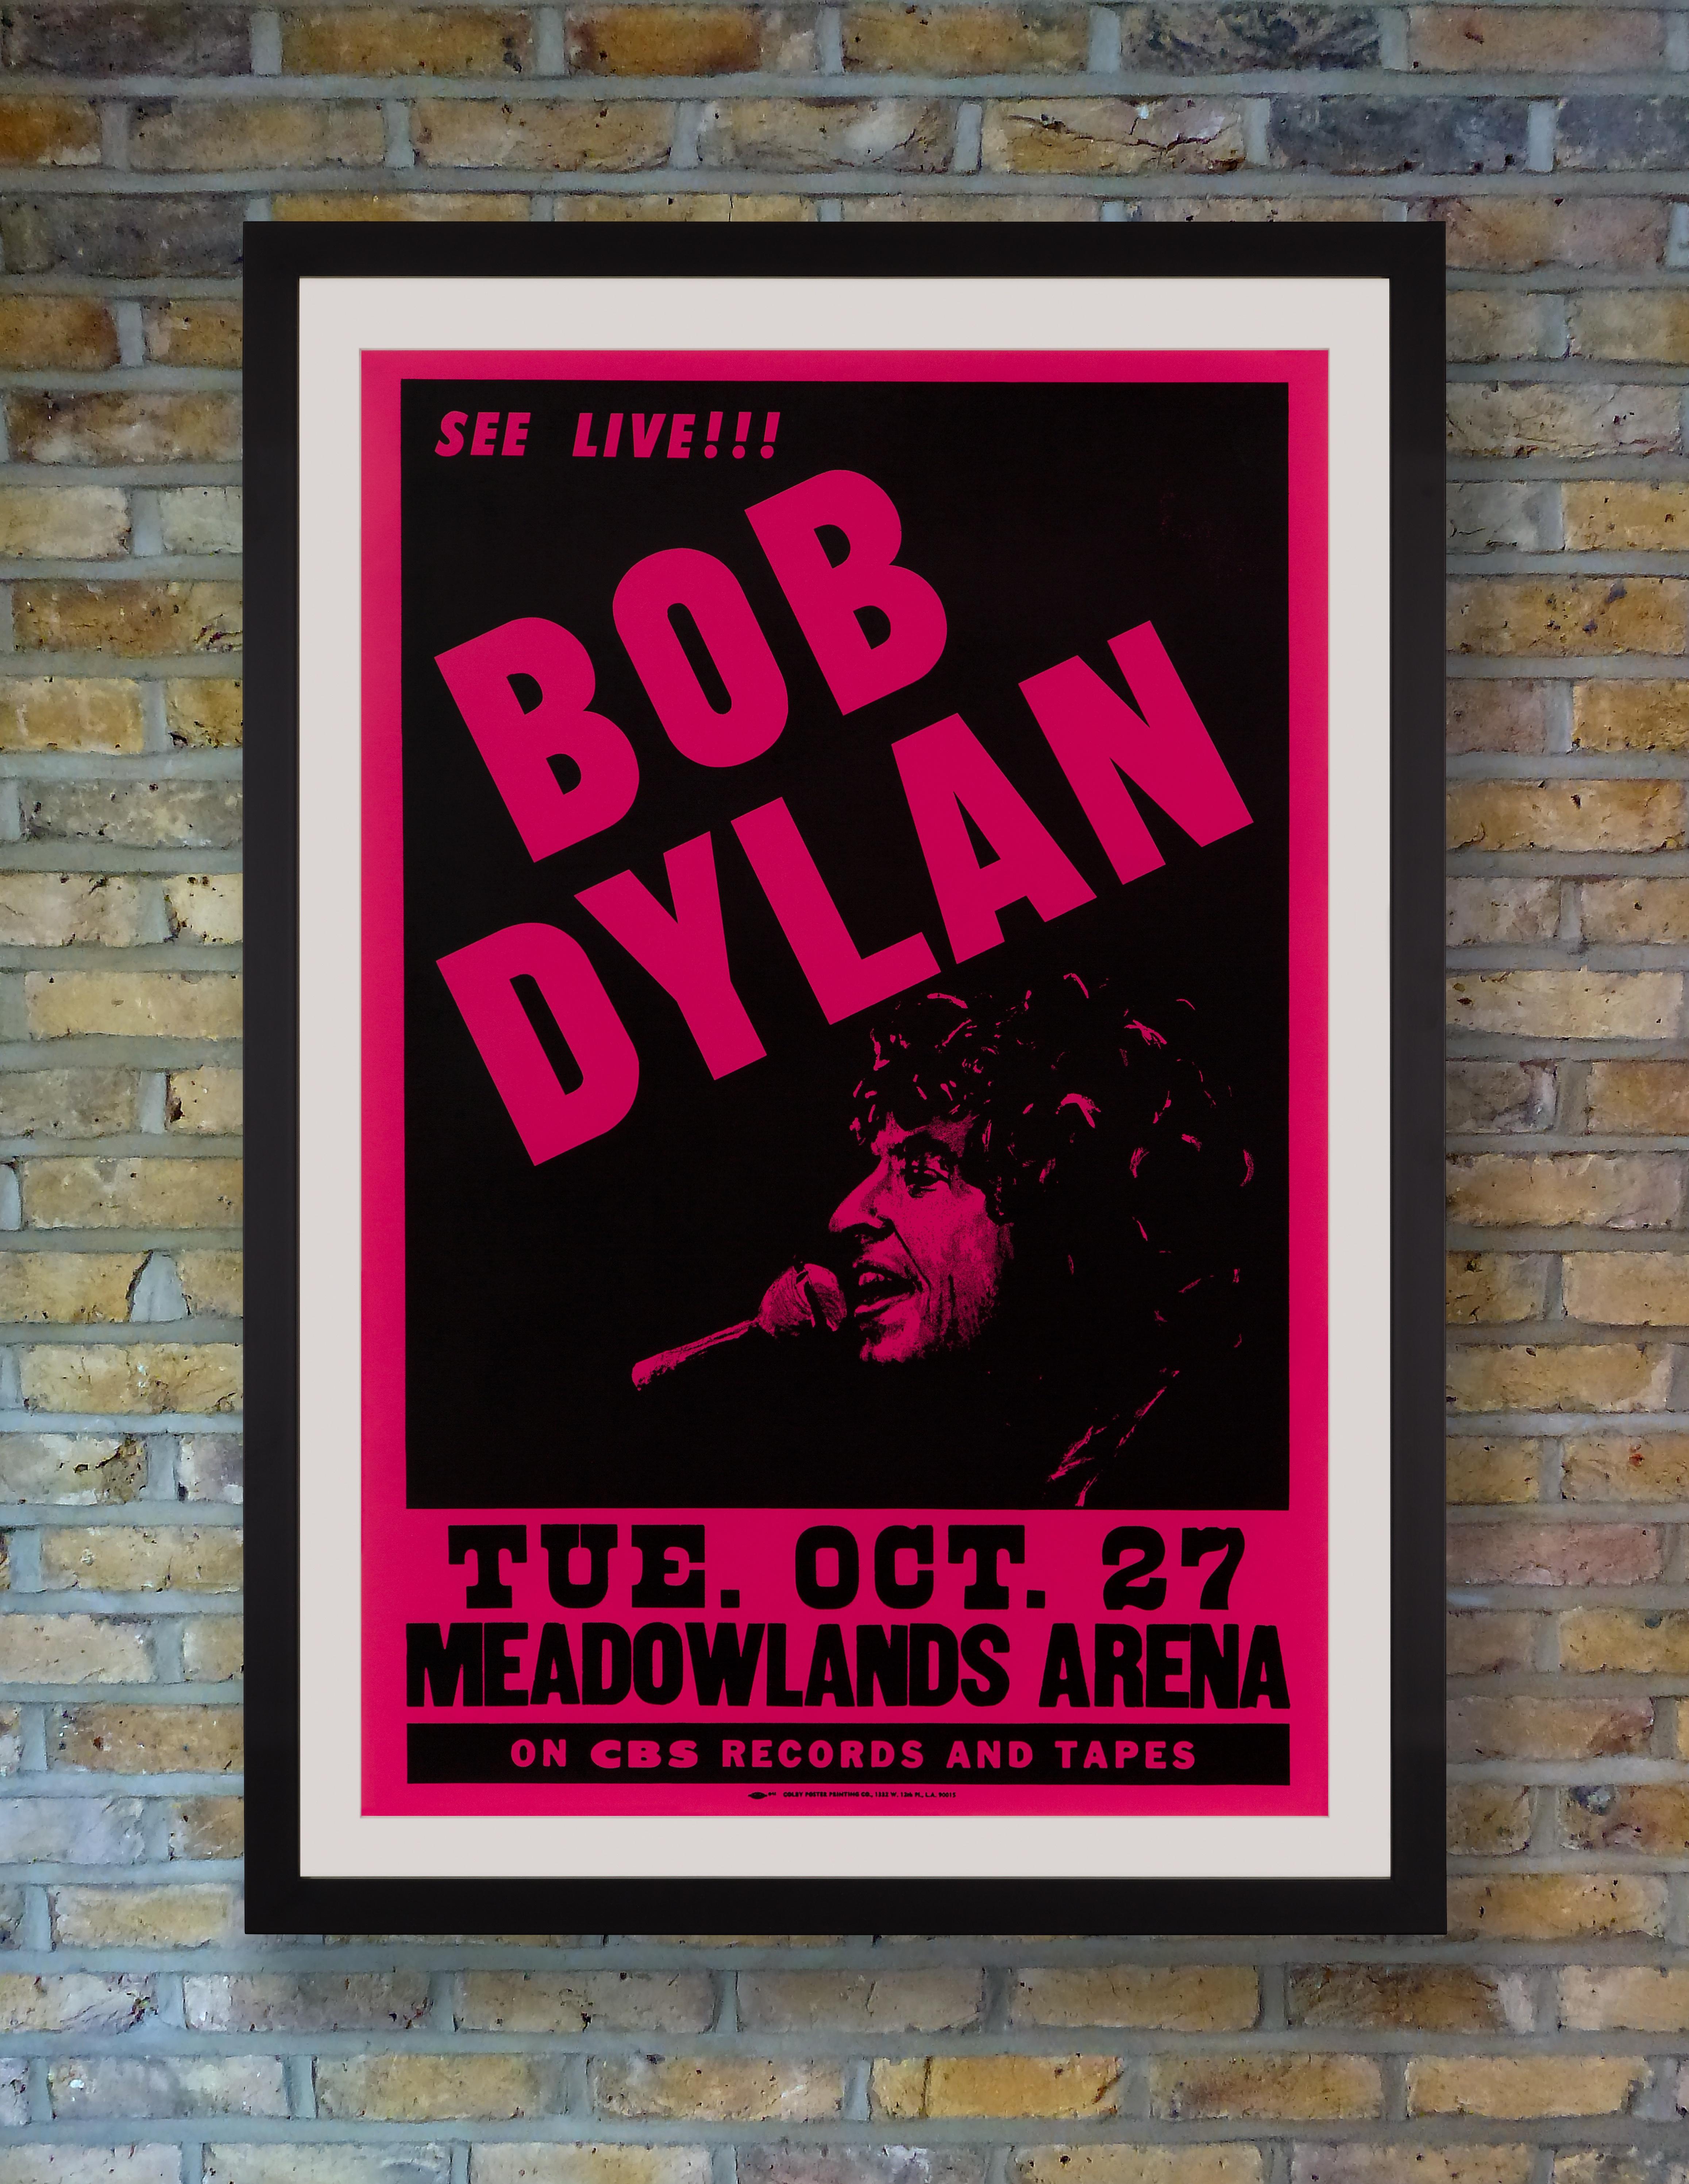 A rare paste-up style poster for a performance by Bob Dylan at the Meadowlands Arena, East Rutherford, New Jersey on Tuesday 27th October, 1981, during the North American leg of the Bob Dylan World Tour 1981 in support of his 1981 album 'Shot of